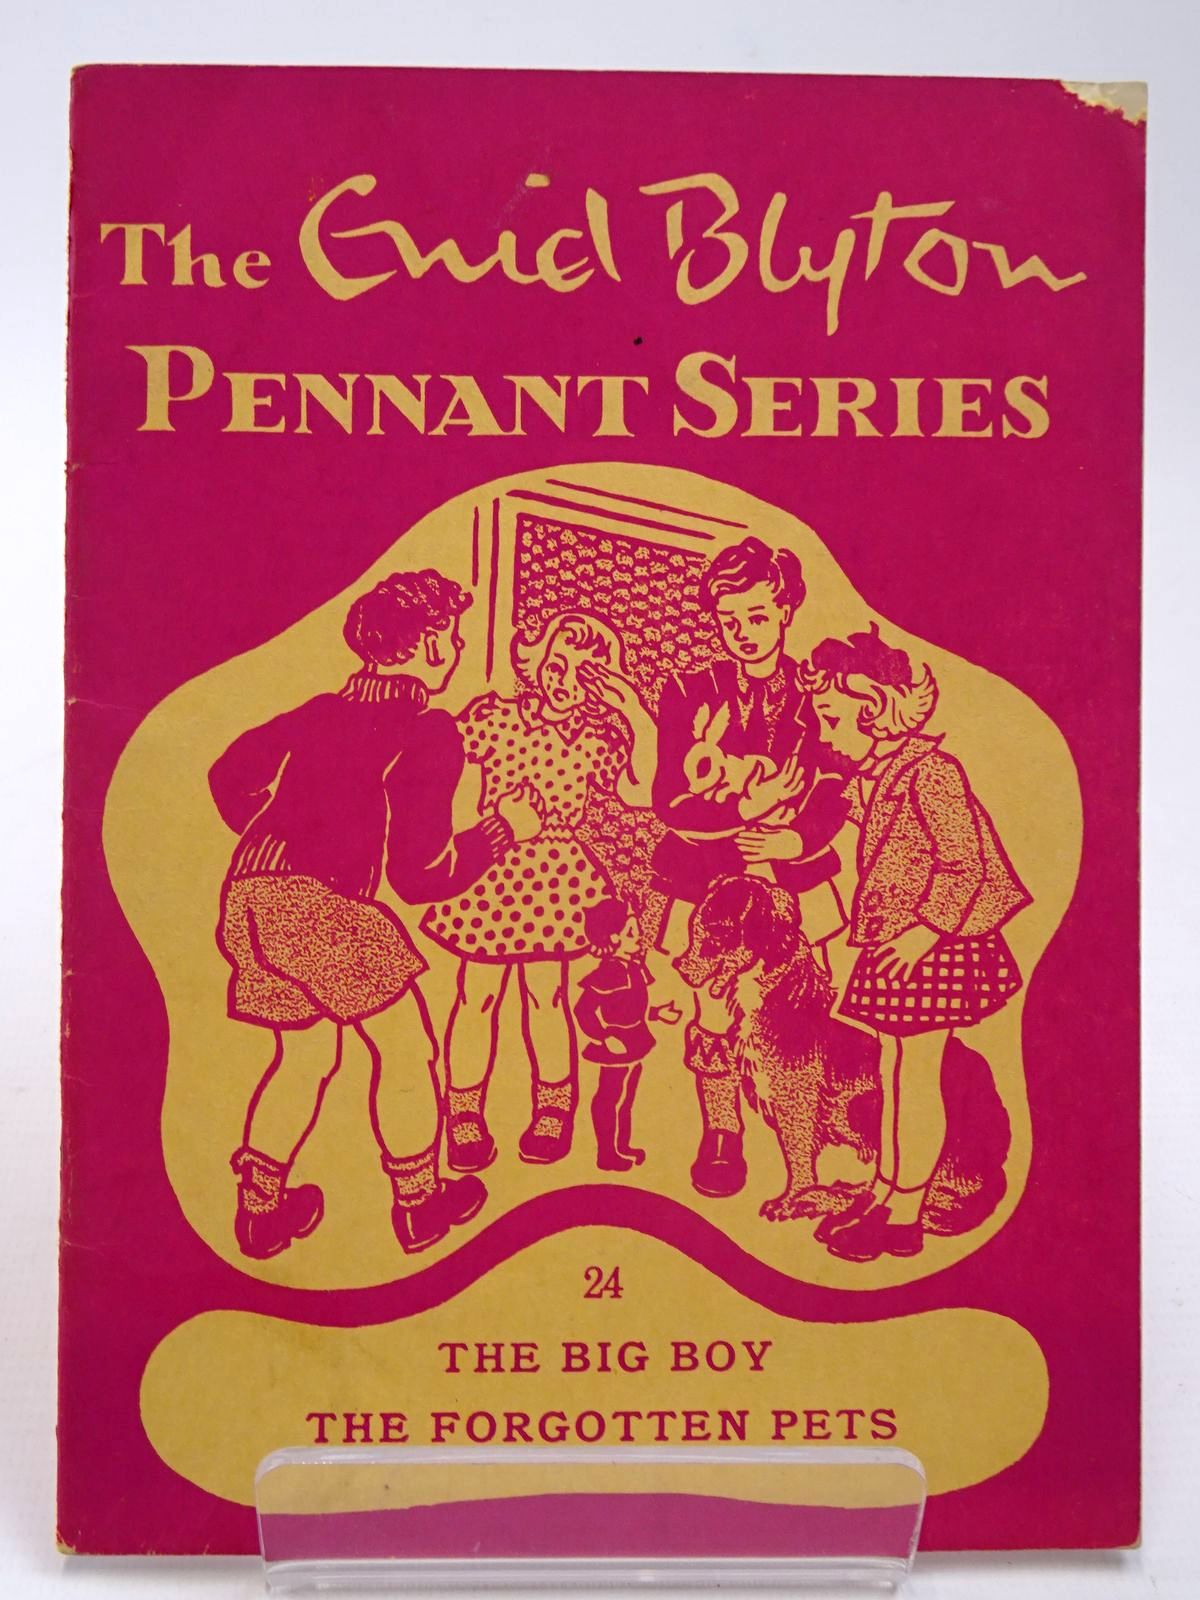 Photo of THE ENID BLYTON PENNANT SERIES No. 24 THE BIG BOY / THE FORGOTTEN PETS written by Blyton, Enid illustrated by Soper, Eileen
Main, Jean published by Macmillan & Co. Ltd. (STOCK CODE: 2130532)  for sale by Stella & Rose's Books